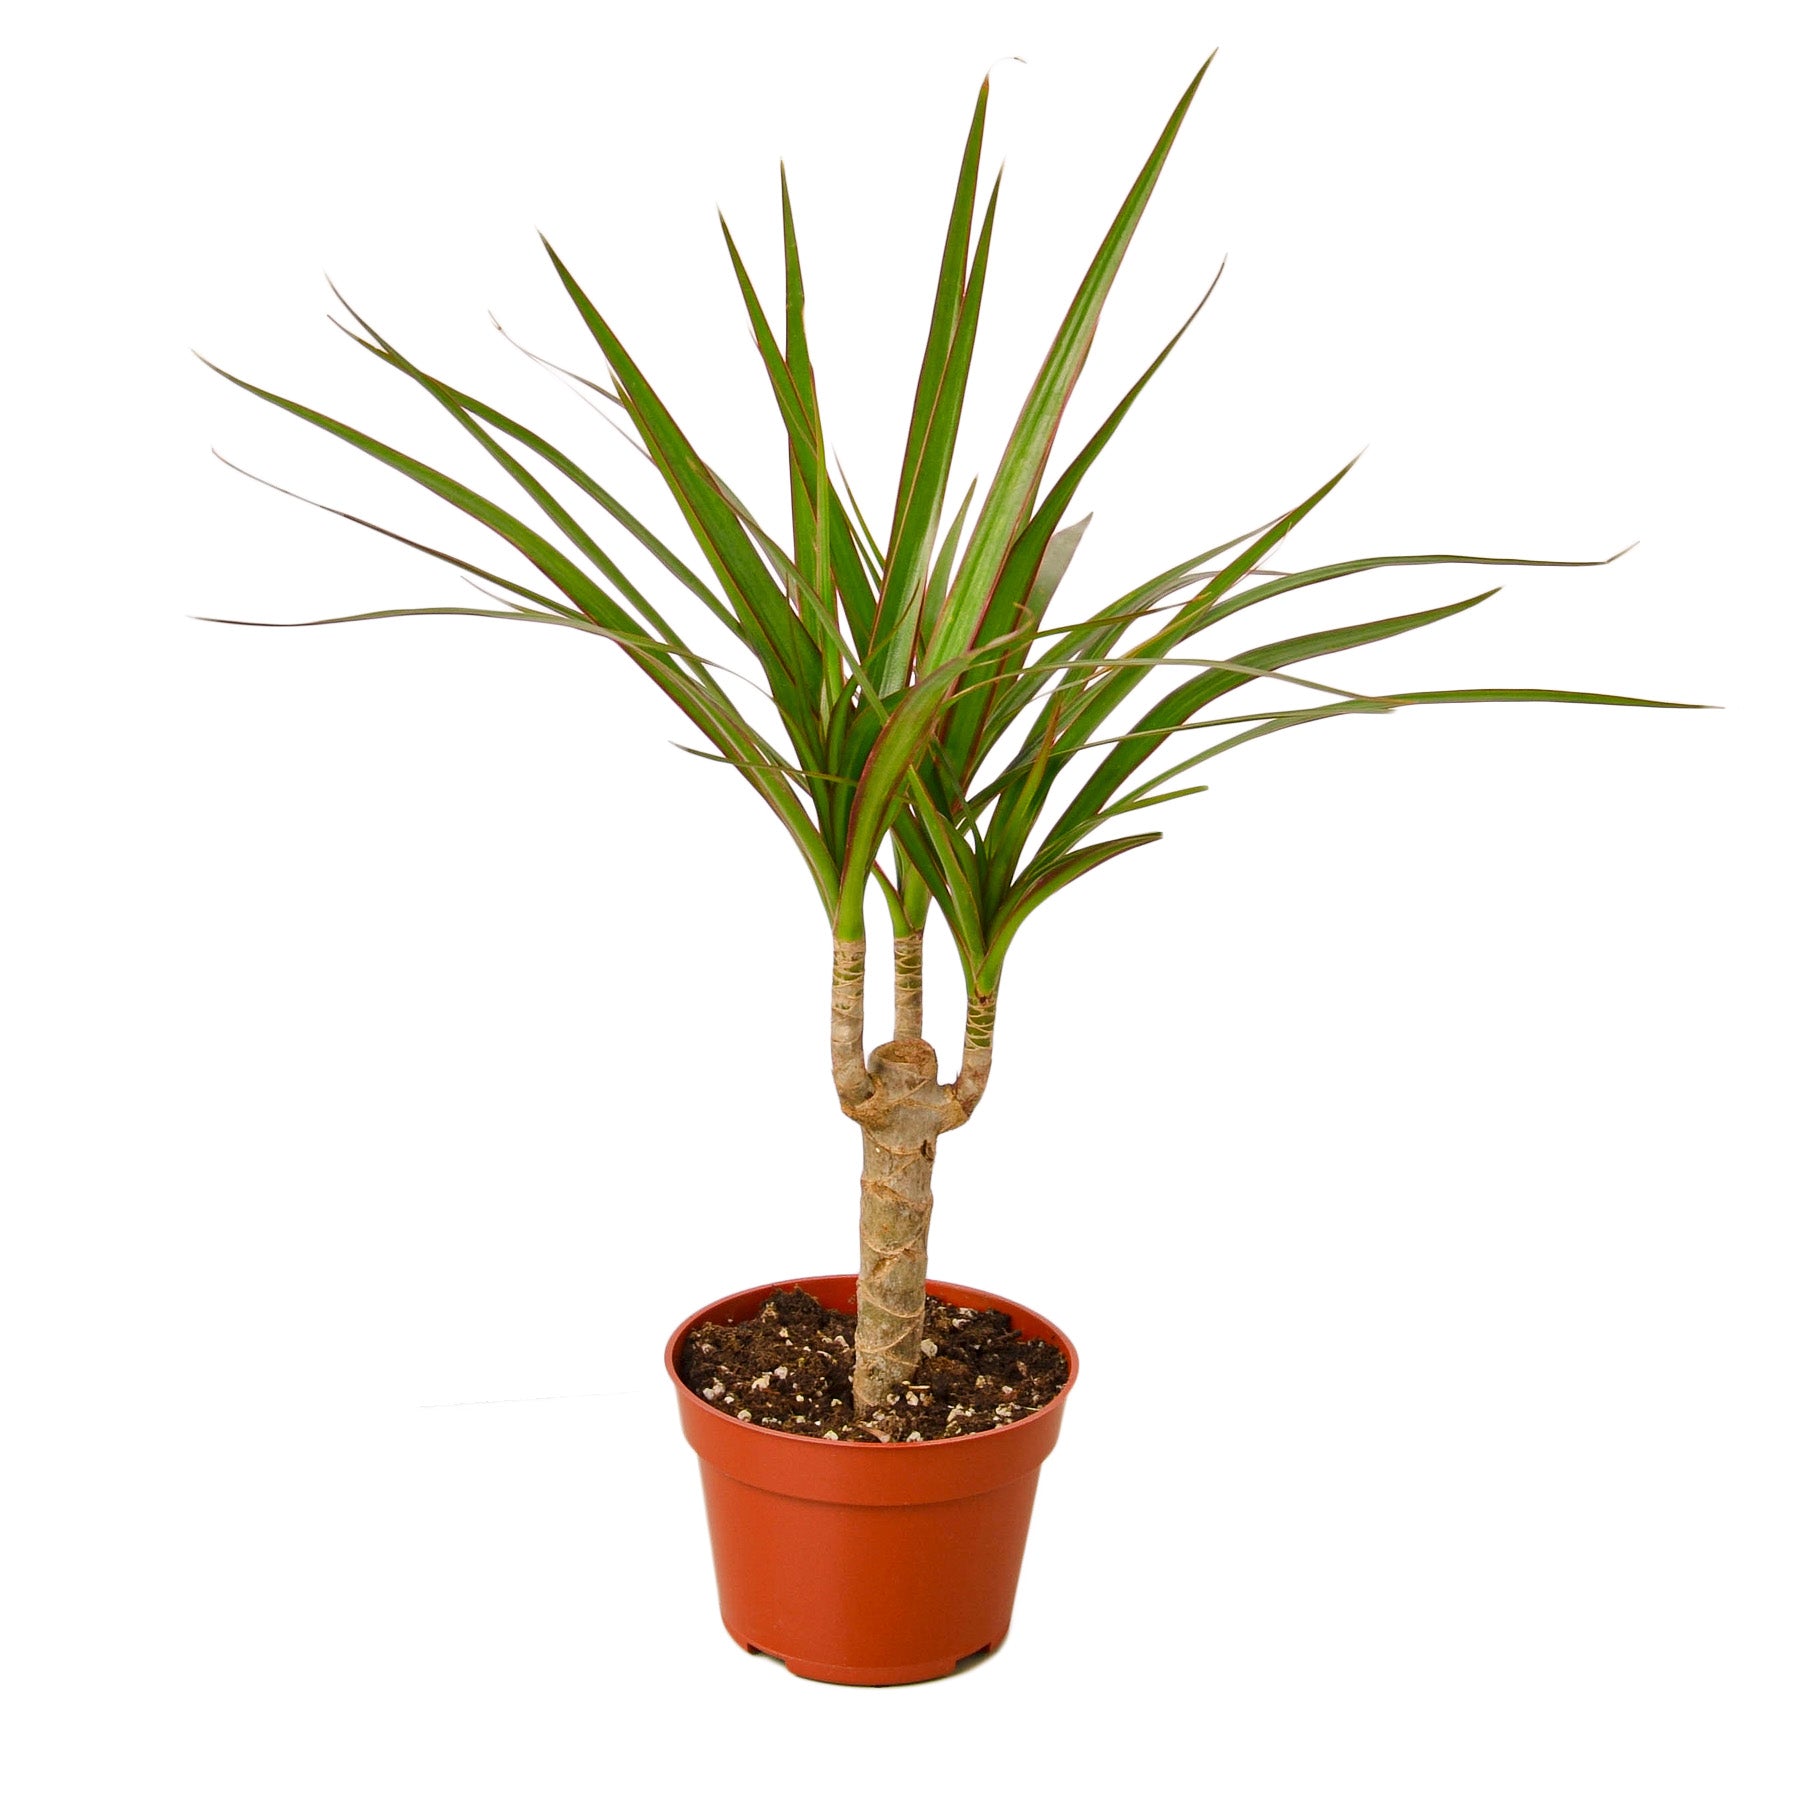 A palm tree in a pot on a white background, available at the top garden center near me.